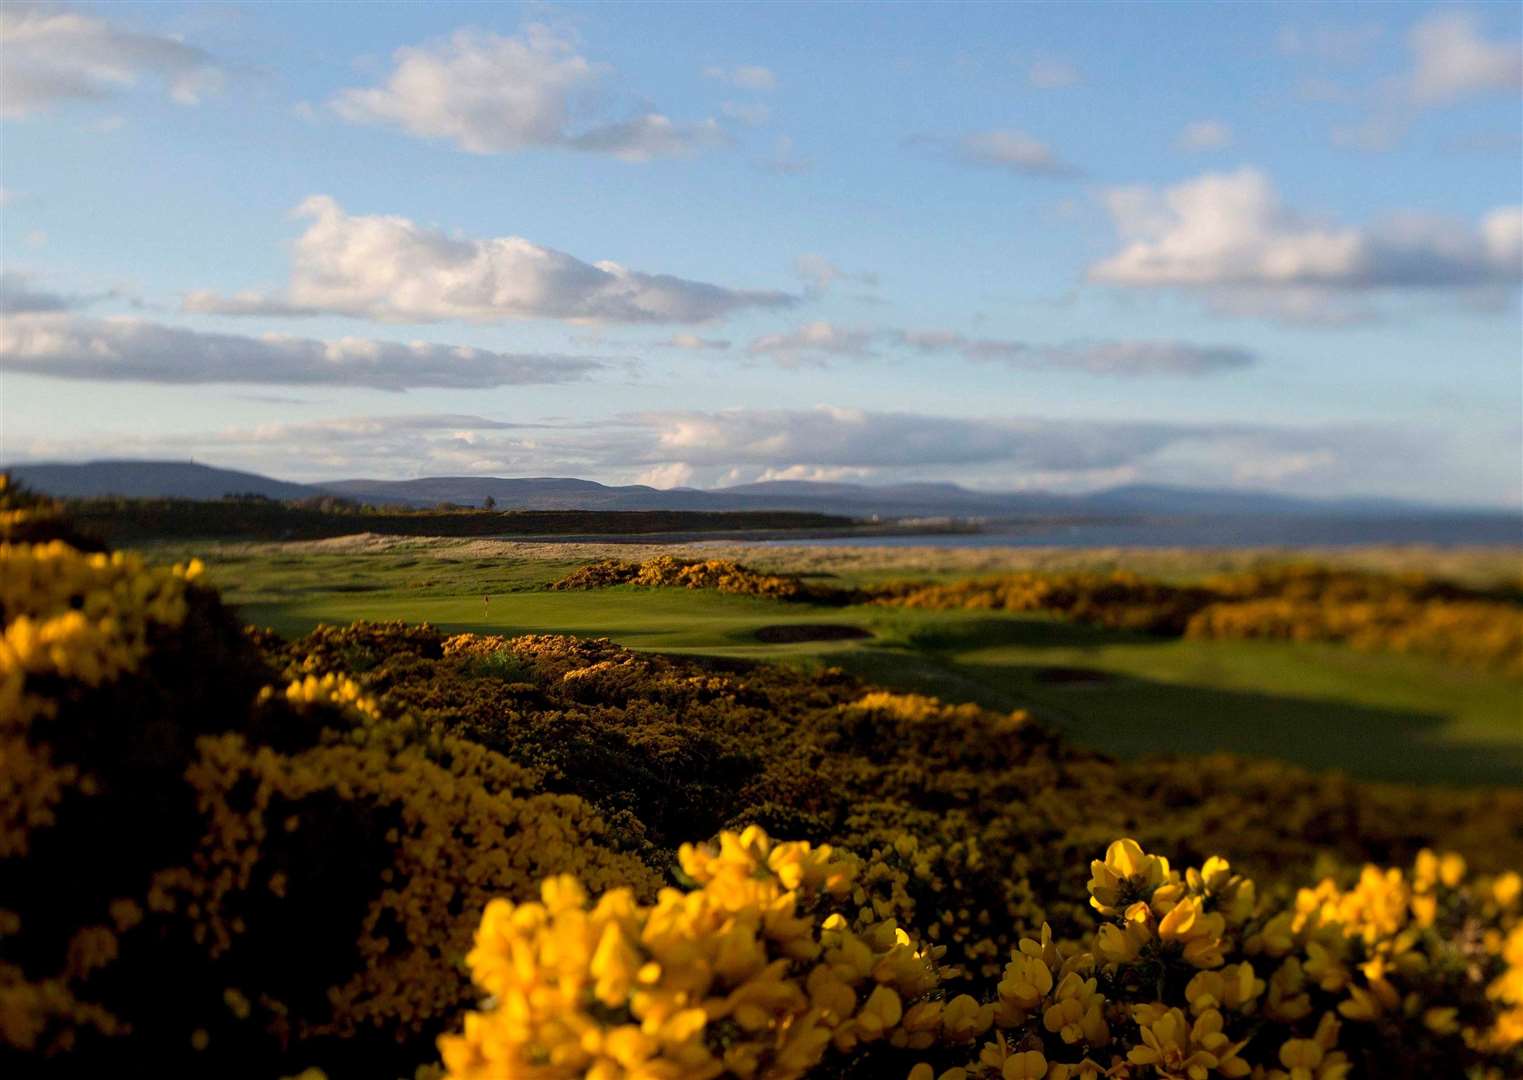 The demand to play Royal Dornoch's Championship Course this year is "unprecedented".